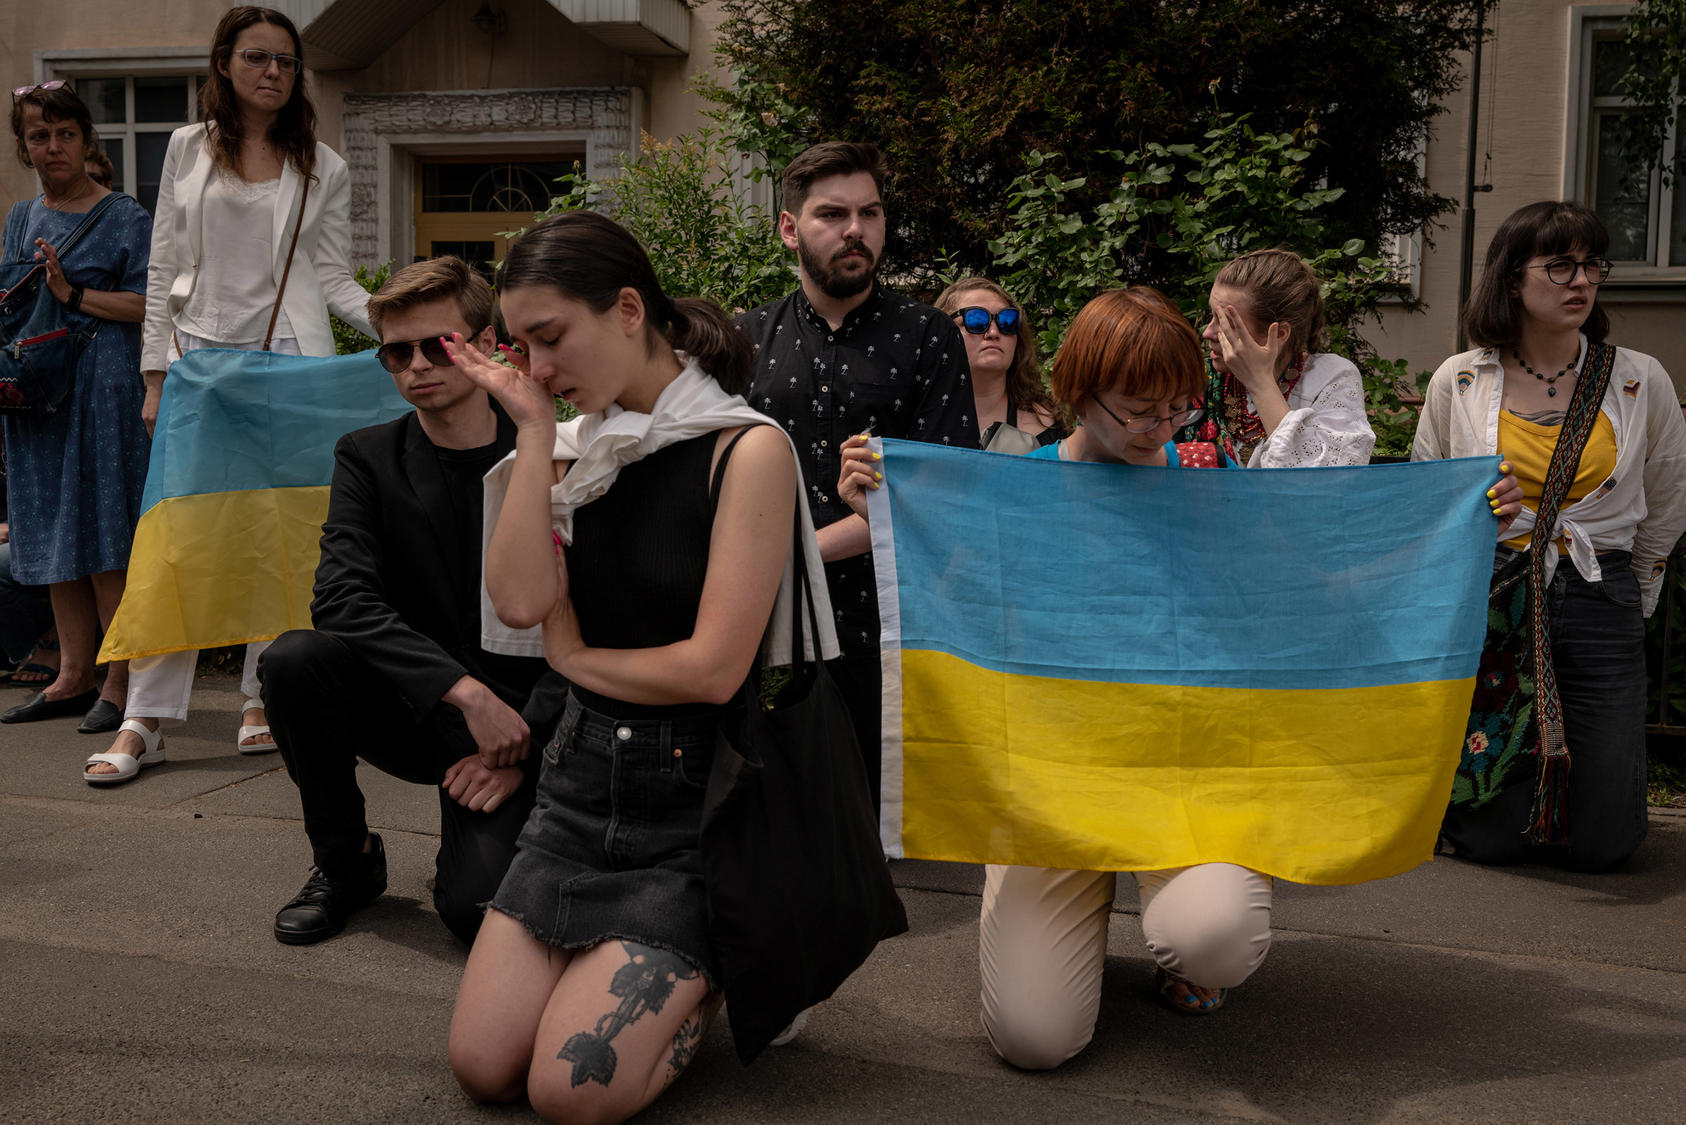 Mourners at a memorial service for Roman Ratushnyi, a Ukrainian soldier who was killed June 9, 2022, during fighting in the Kharkiv region, in Kyiv, June 16, 2022. (Nicole Tung/The New York Times)